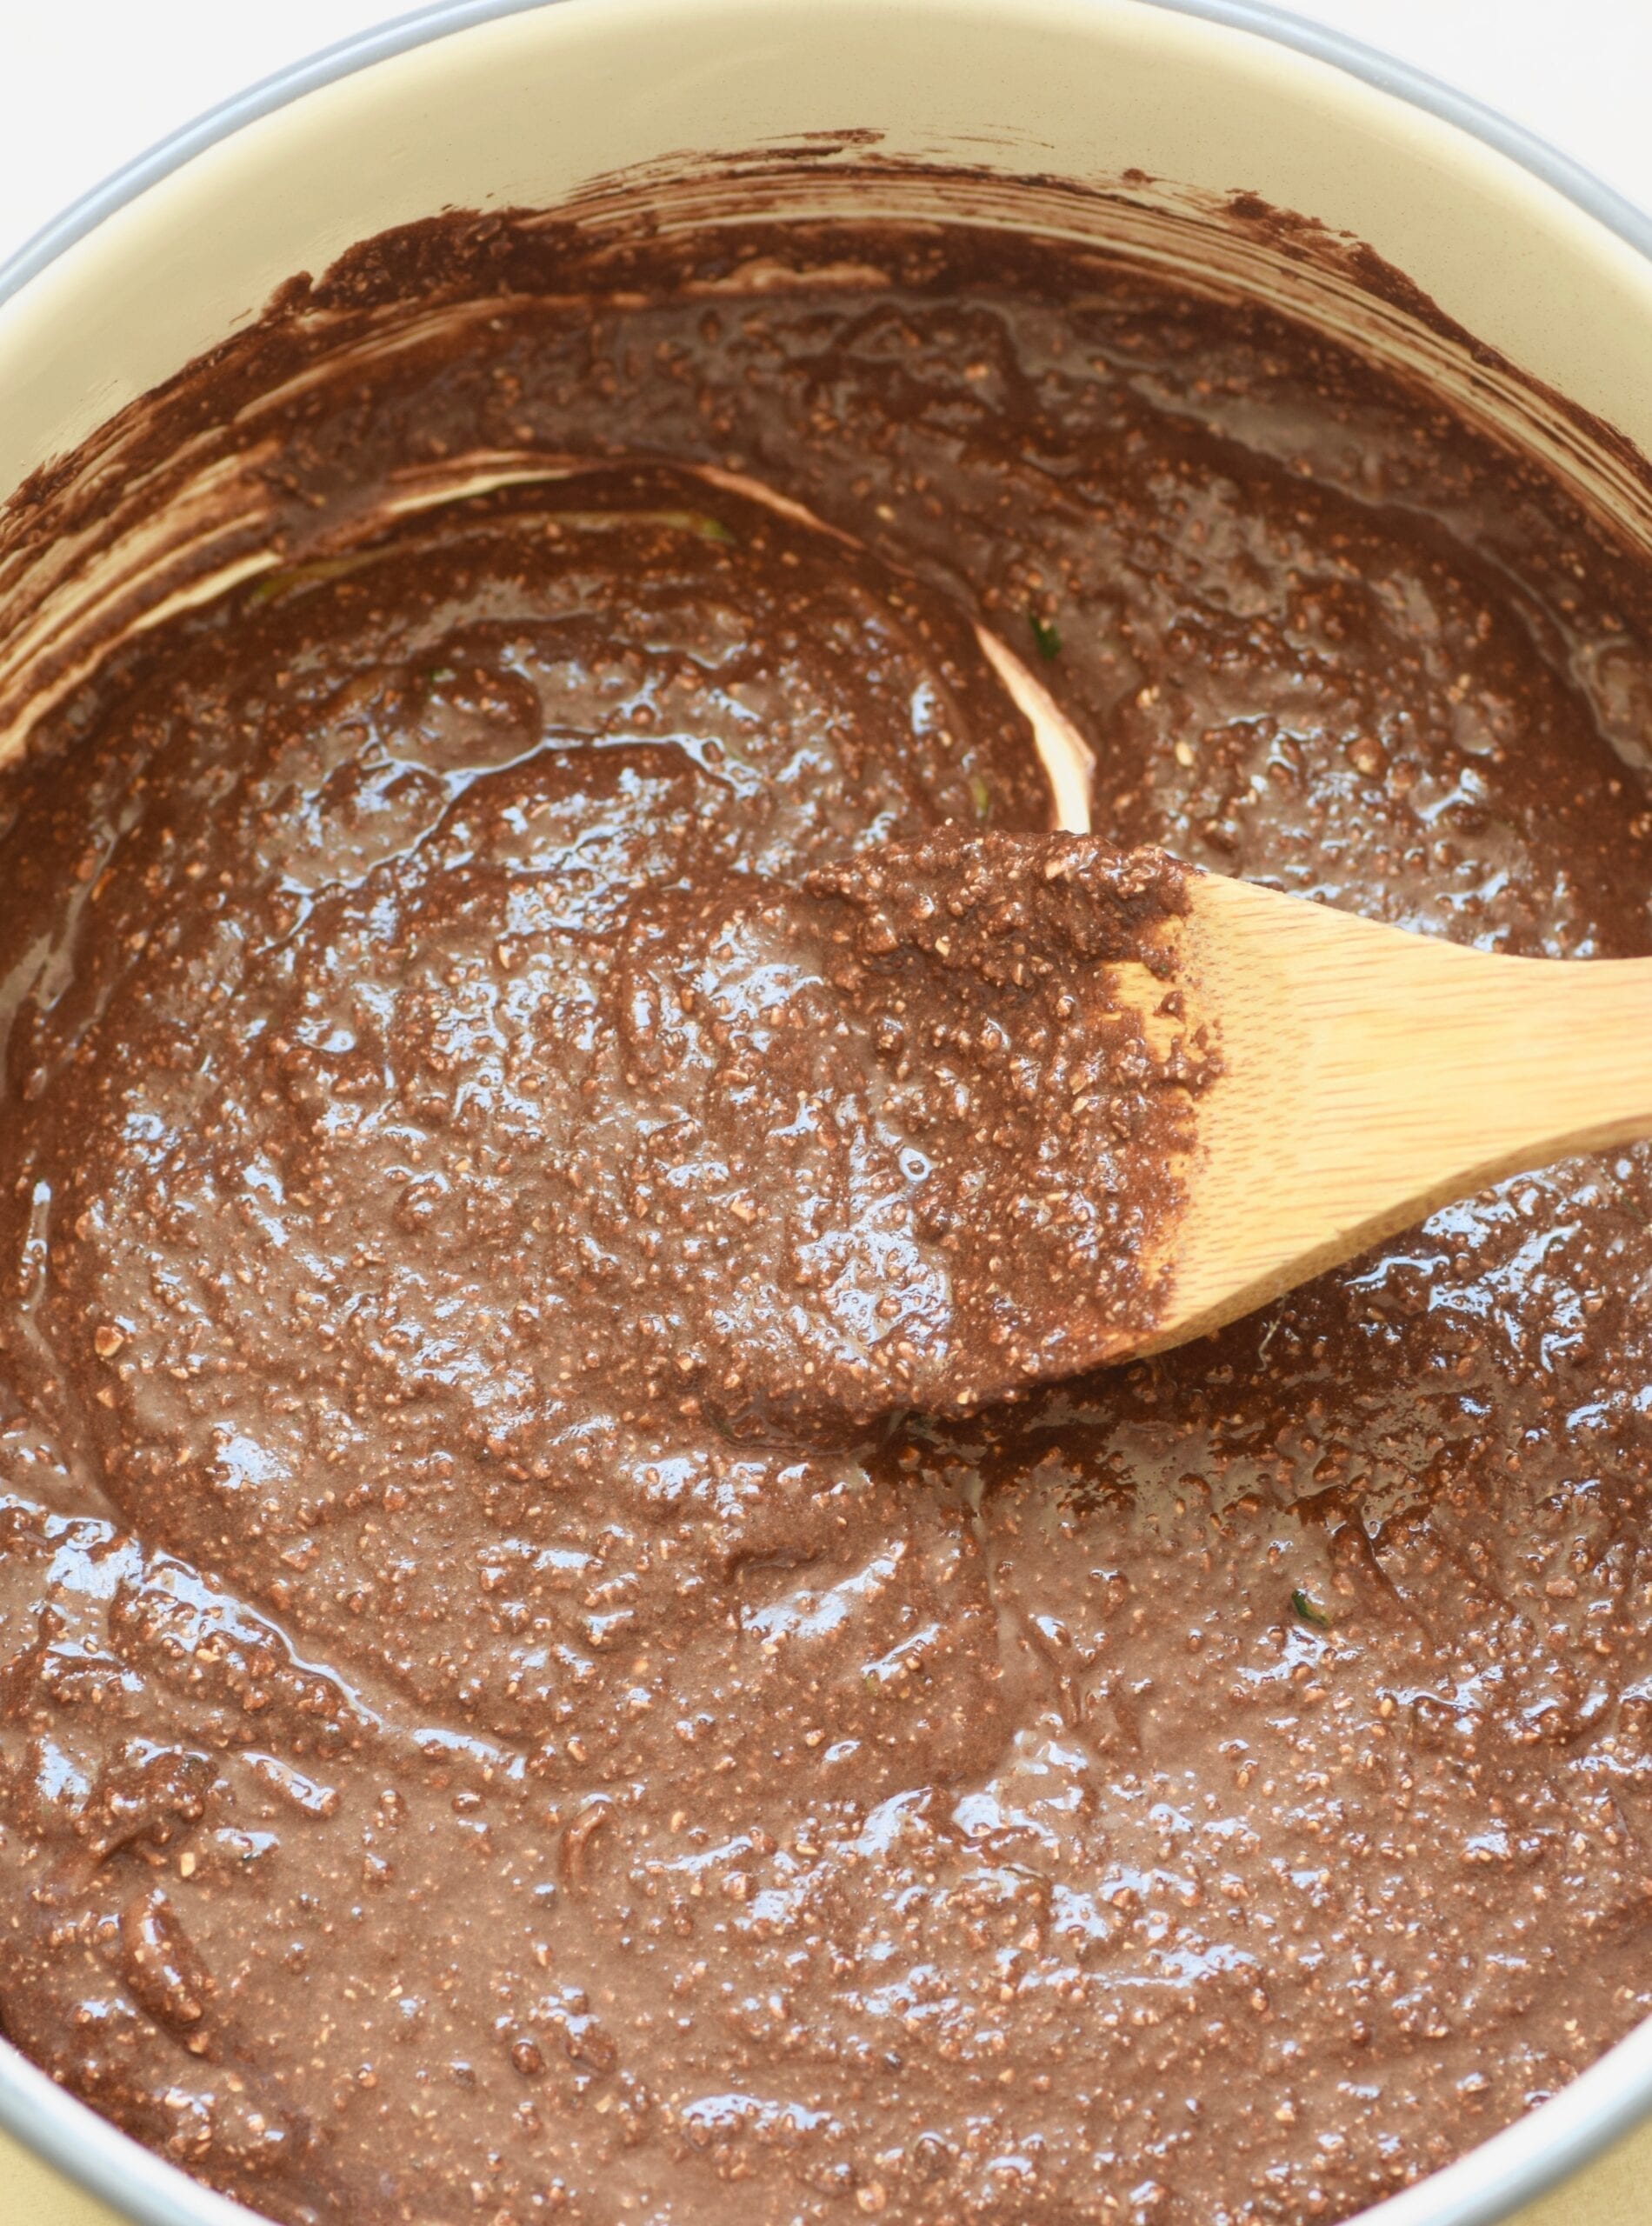 How to make brownies from scratch